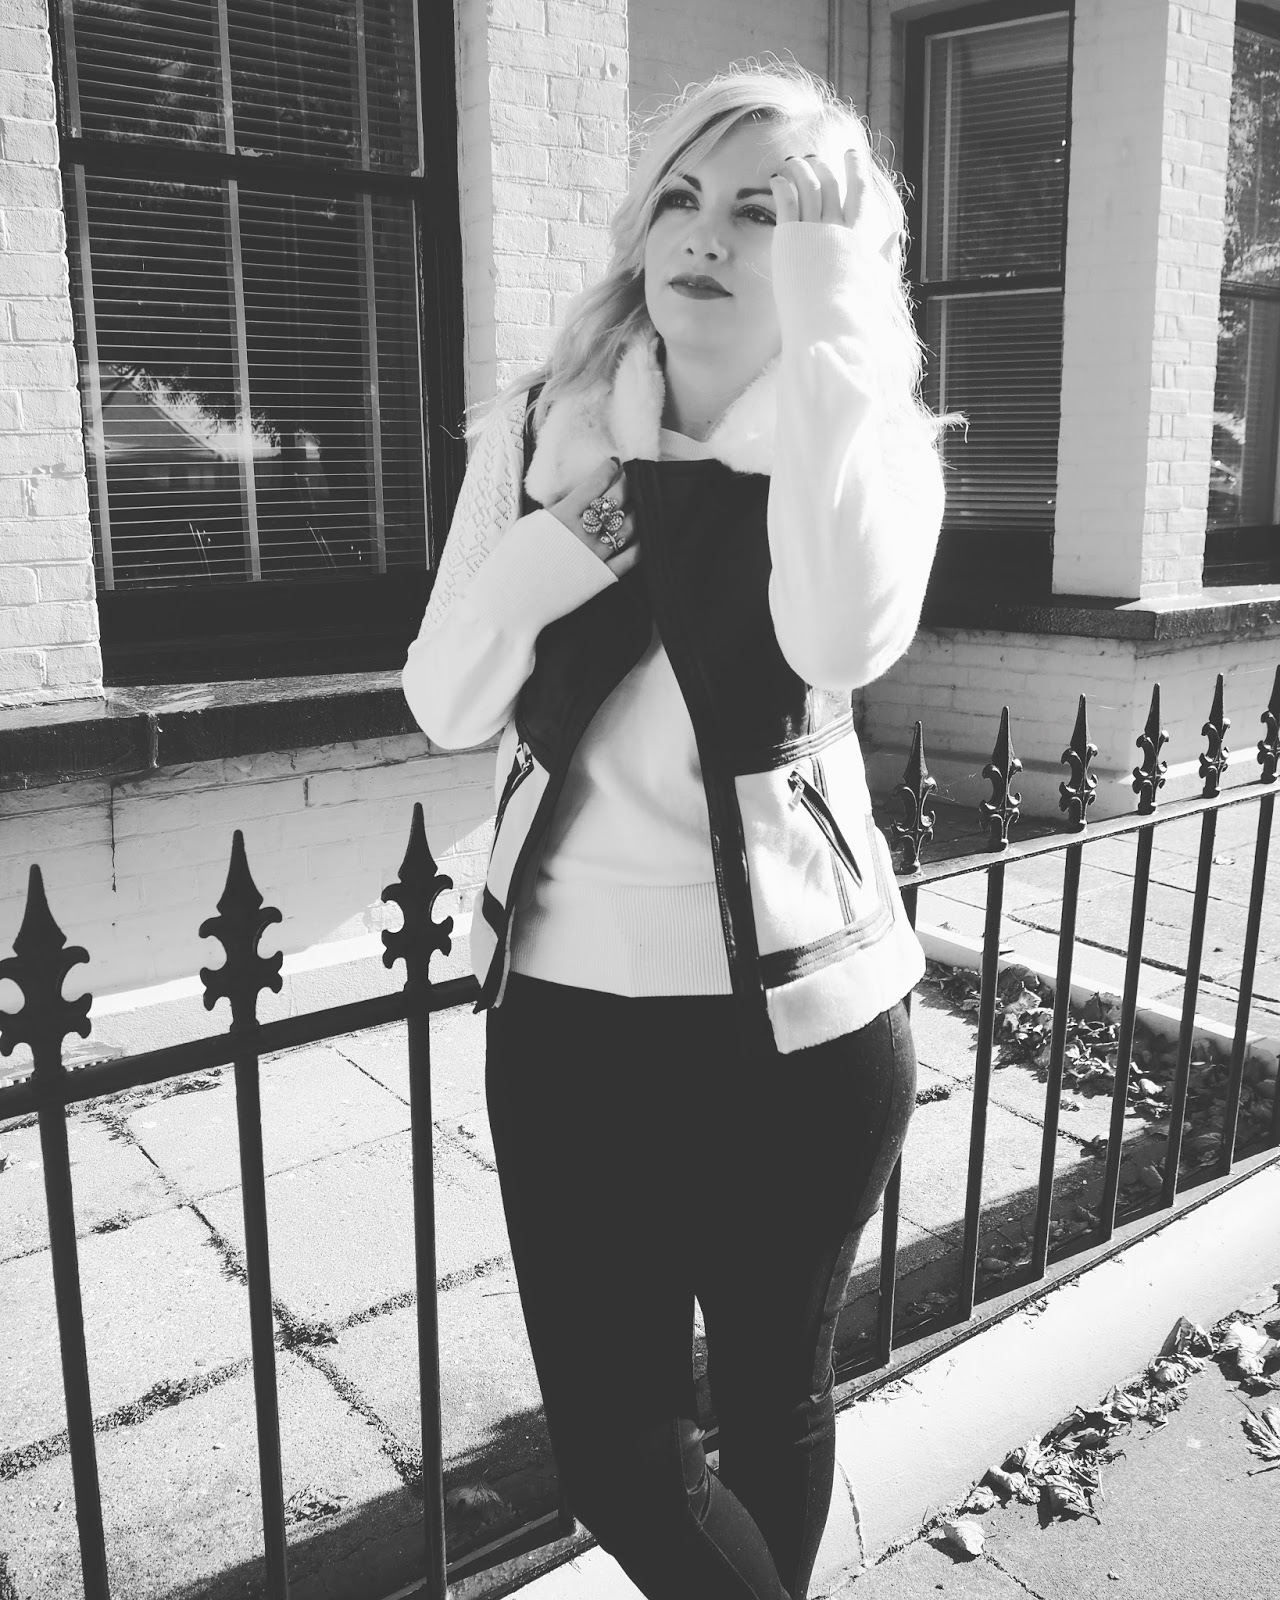 Monochrome Layering, Katie Kirk Loves, Outfit Ideas, Monochrome Fashion, Fashion Layering, Oasis Fashion, Fashion Blogger, UK Fashion Blogger, Outfit Of The Day, Style Blogger, Outfit Photoshoot, UK Blogger, UK Fashion Blogger